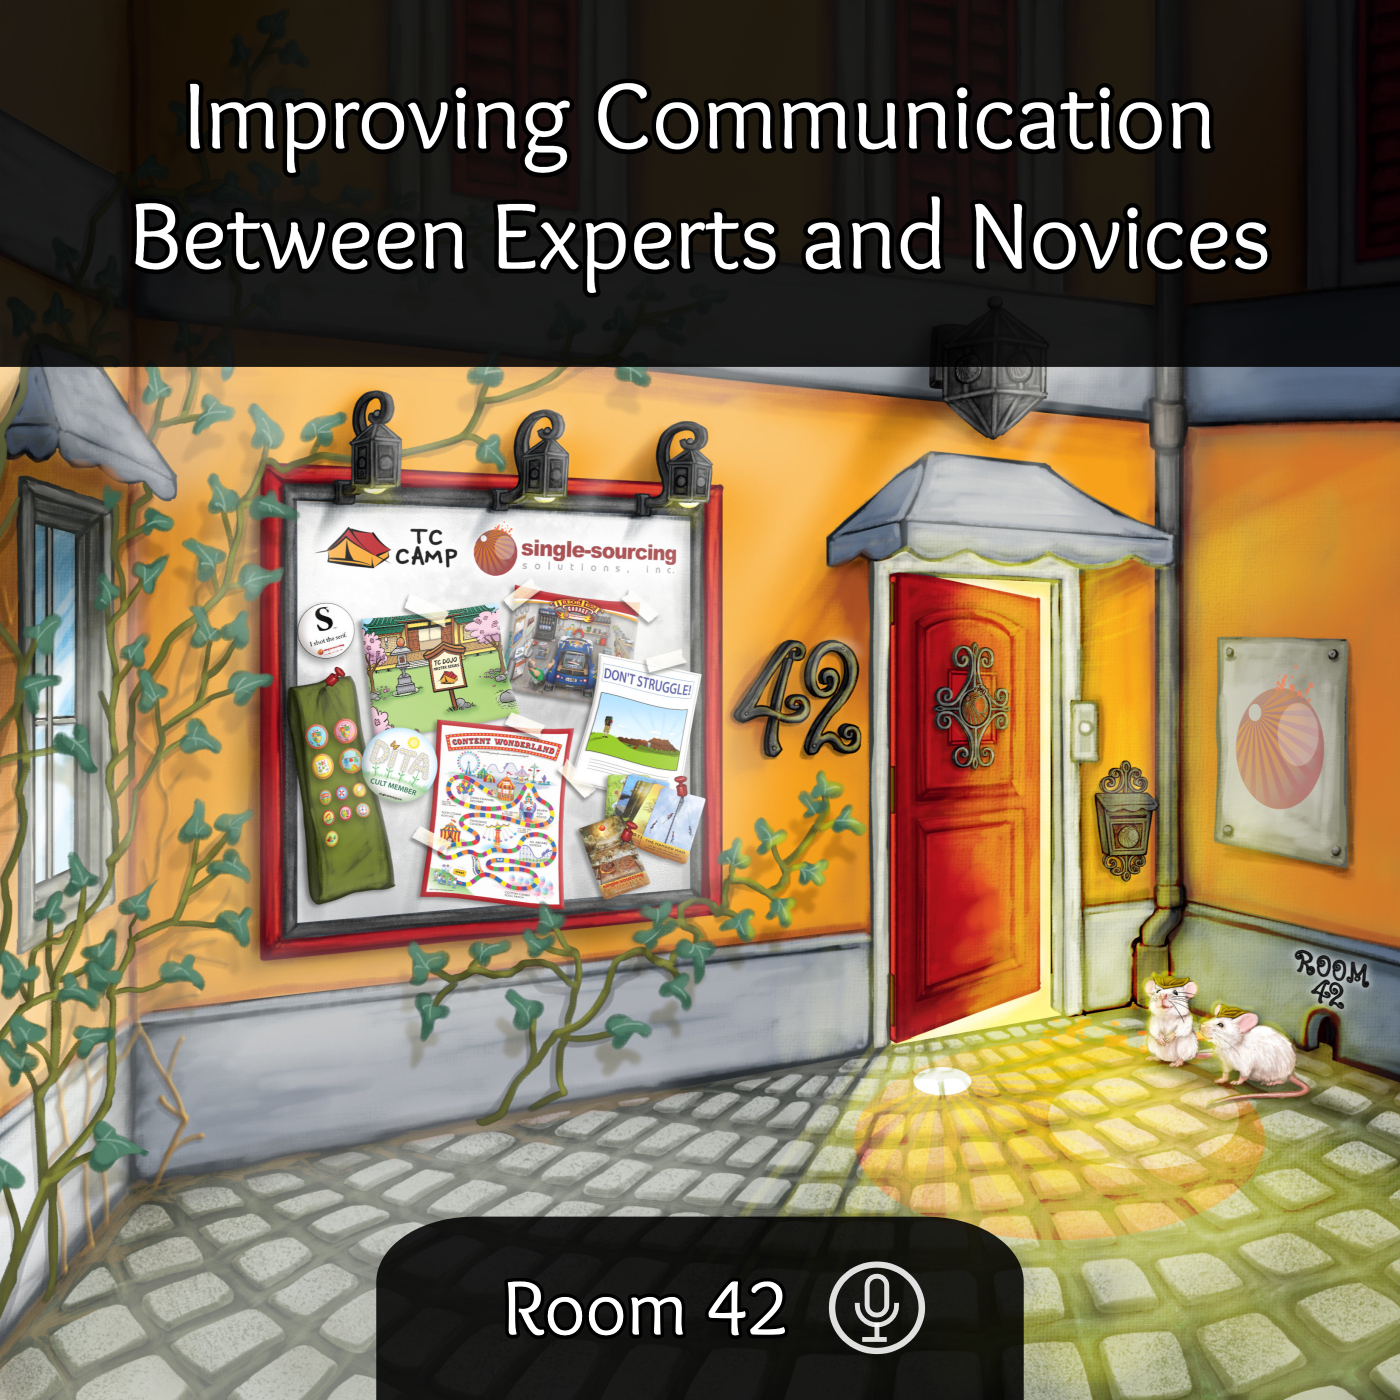 Improving Communication Between Experts and Novices